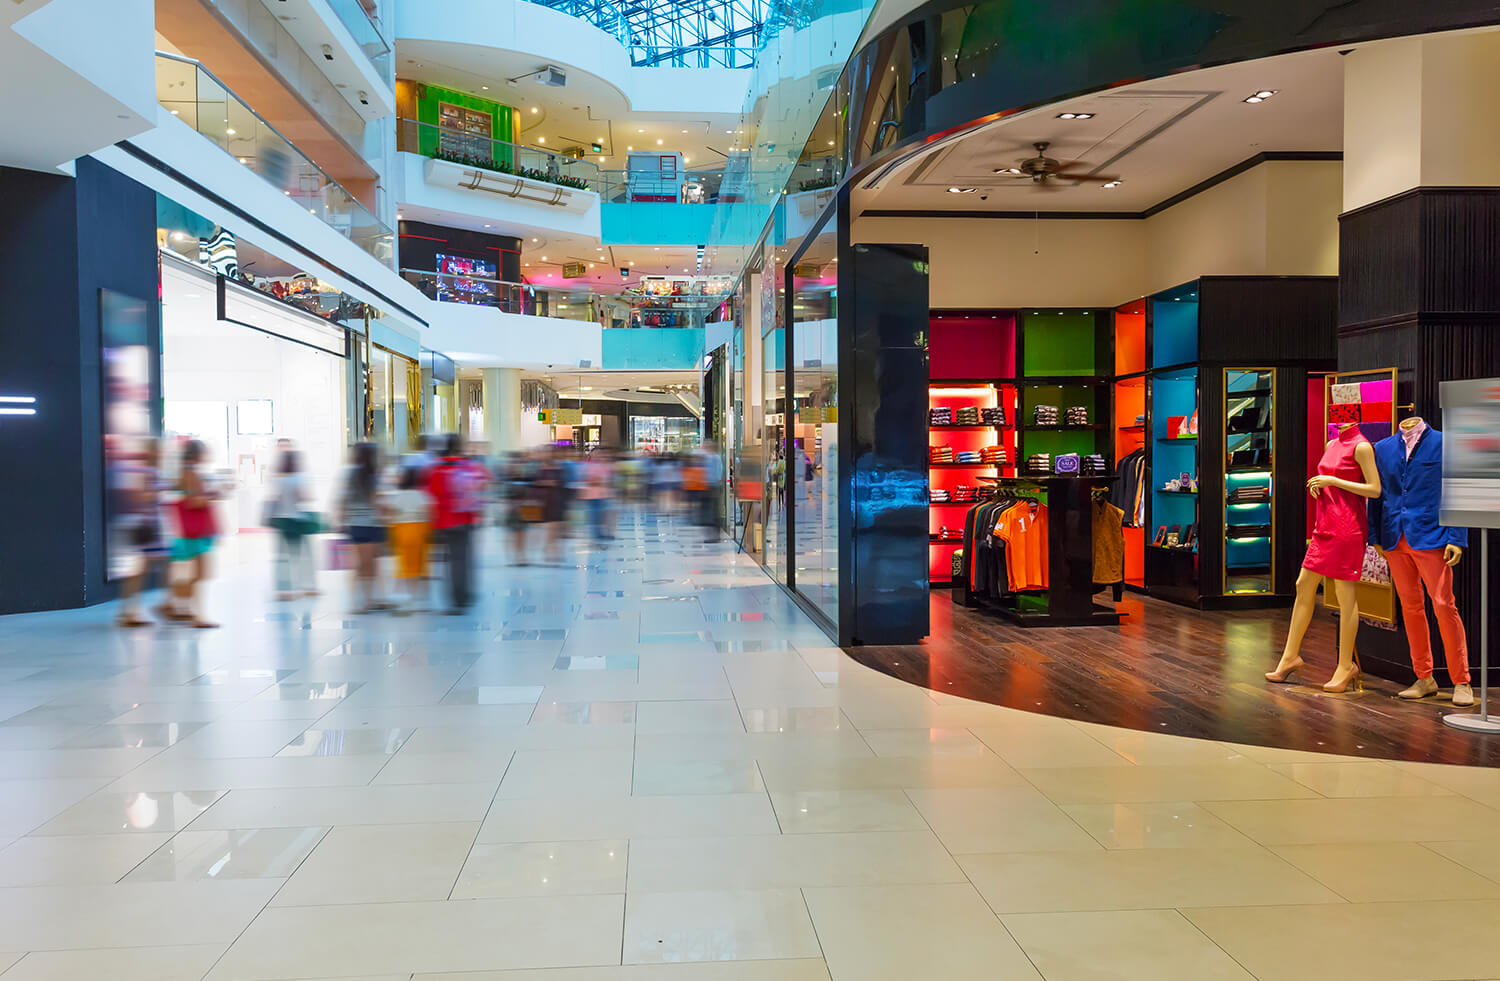 industries for security systems - Retail